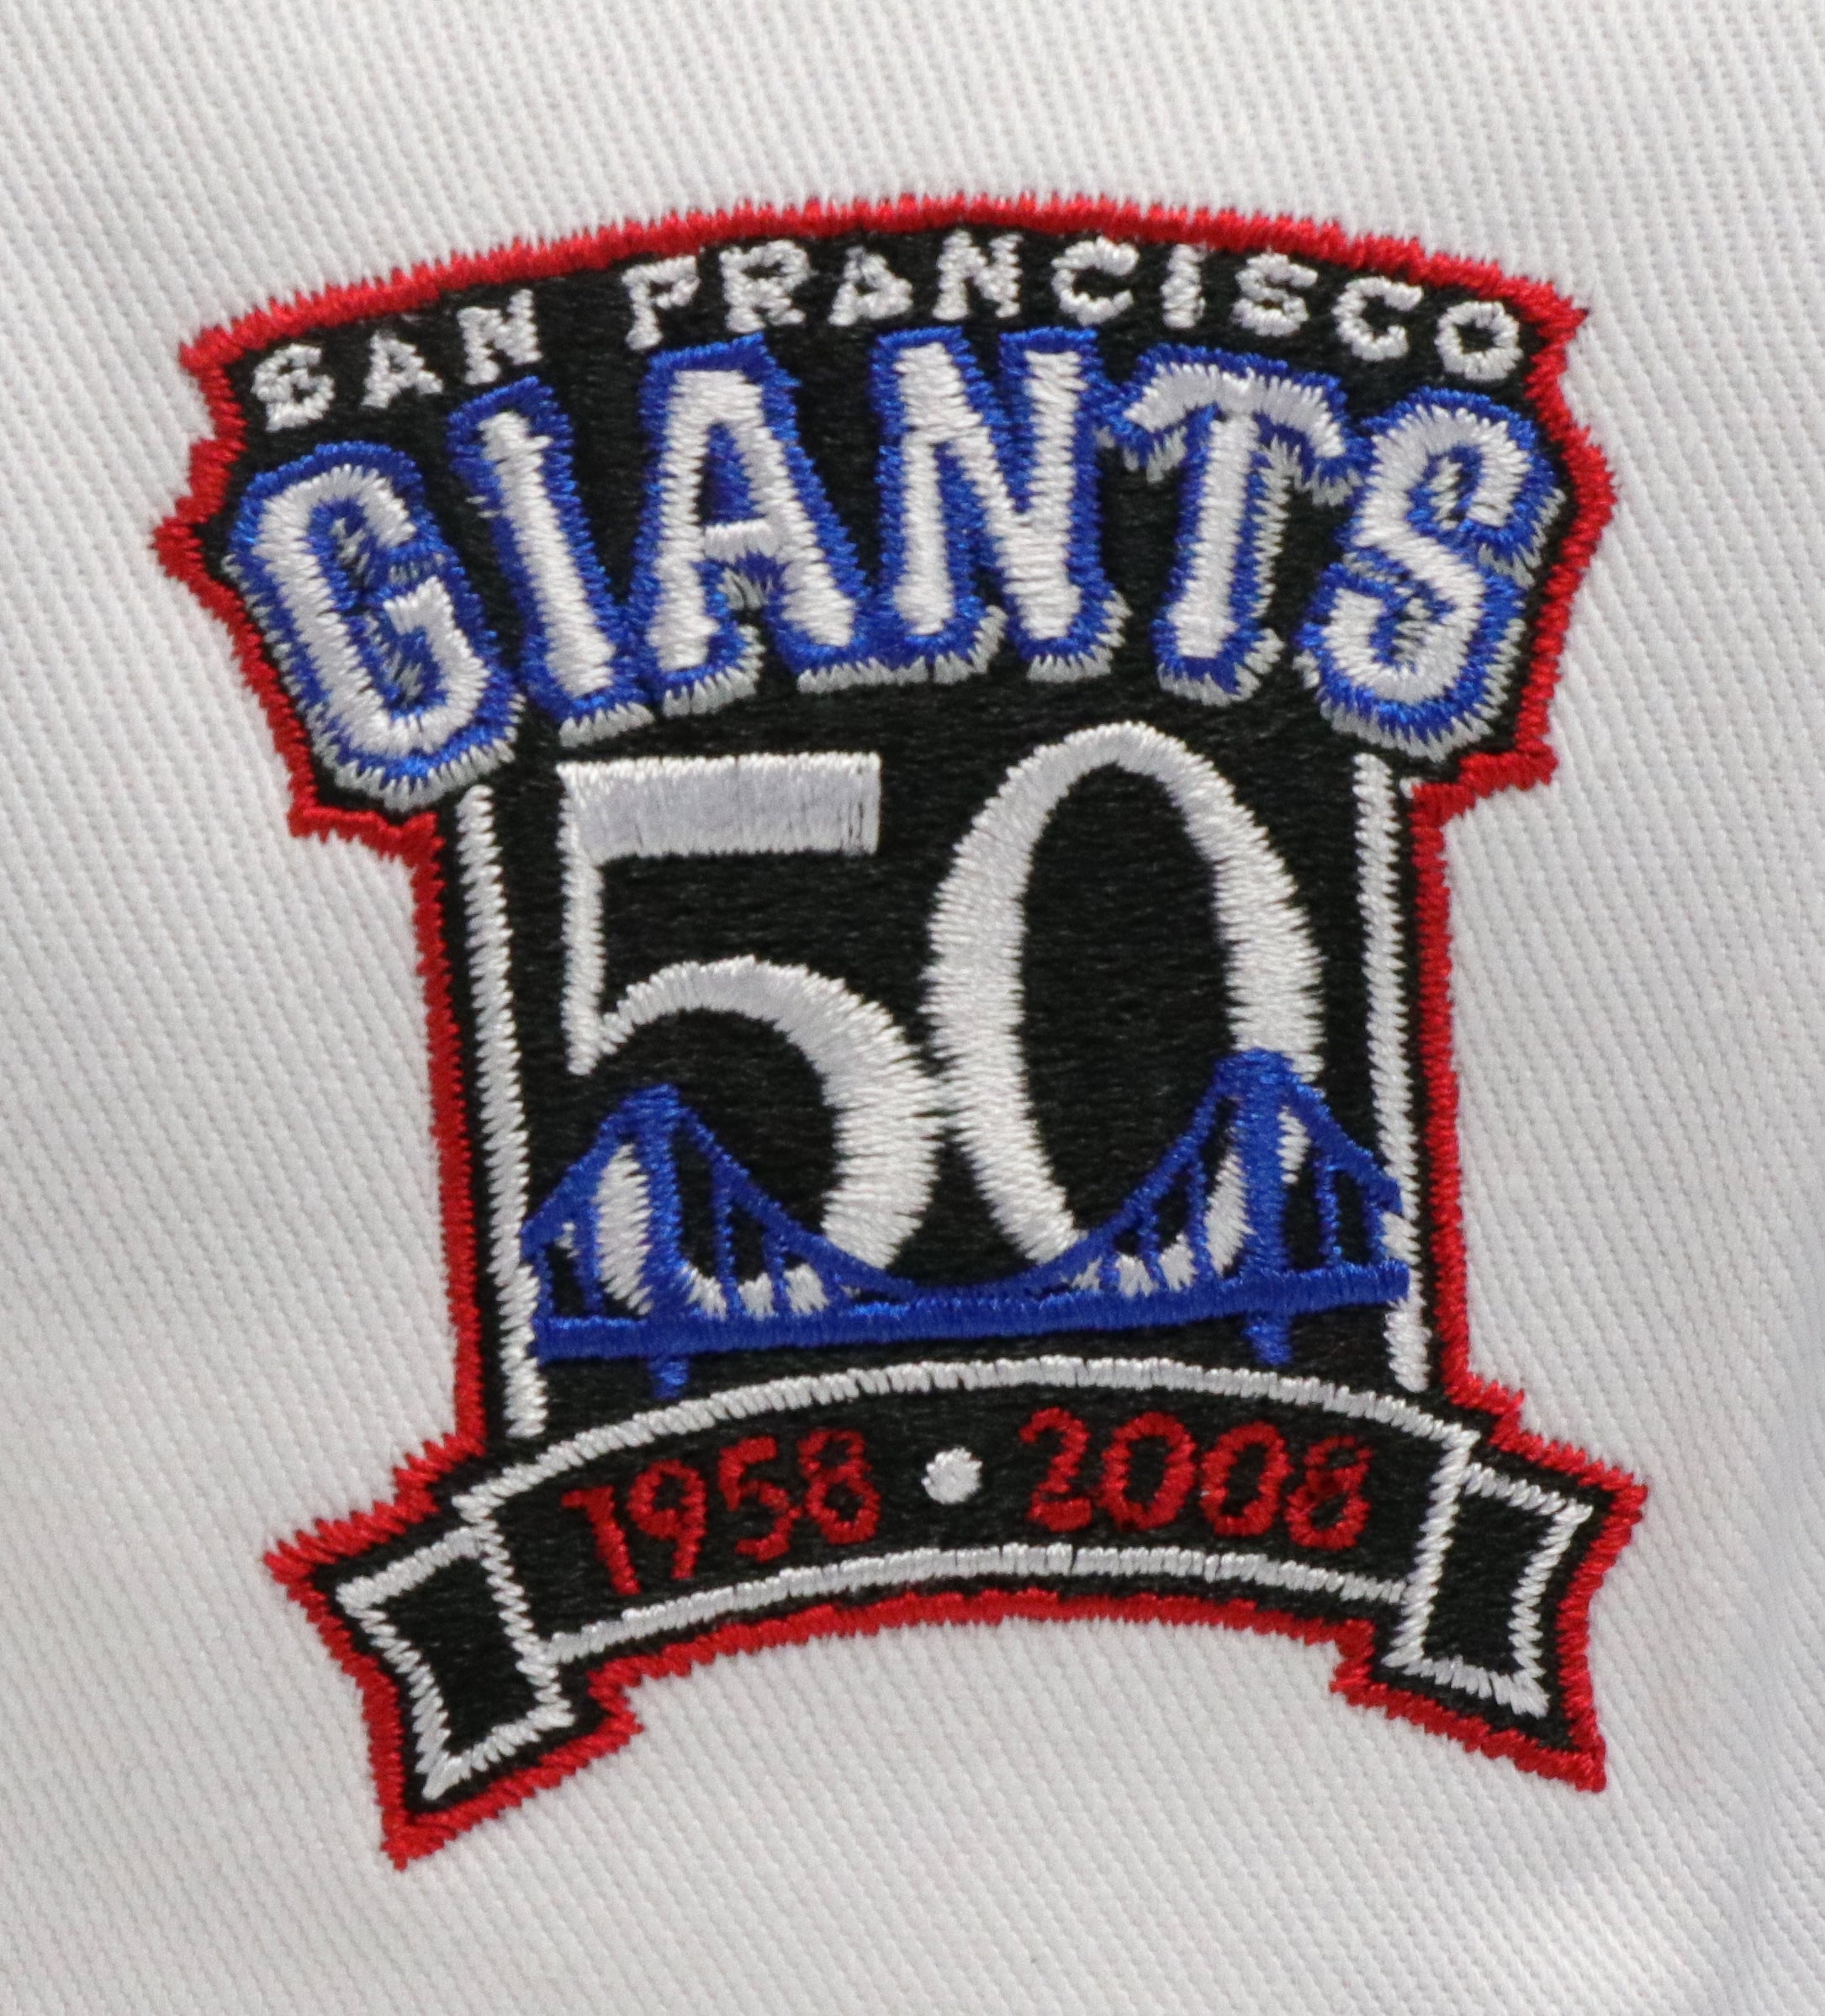 SAN FRANCISCO GIANTS (50TH ANN "1958-2008") NEW ERA 59FIFTY FITTED (SKY BLUE UNDER VISOR)